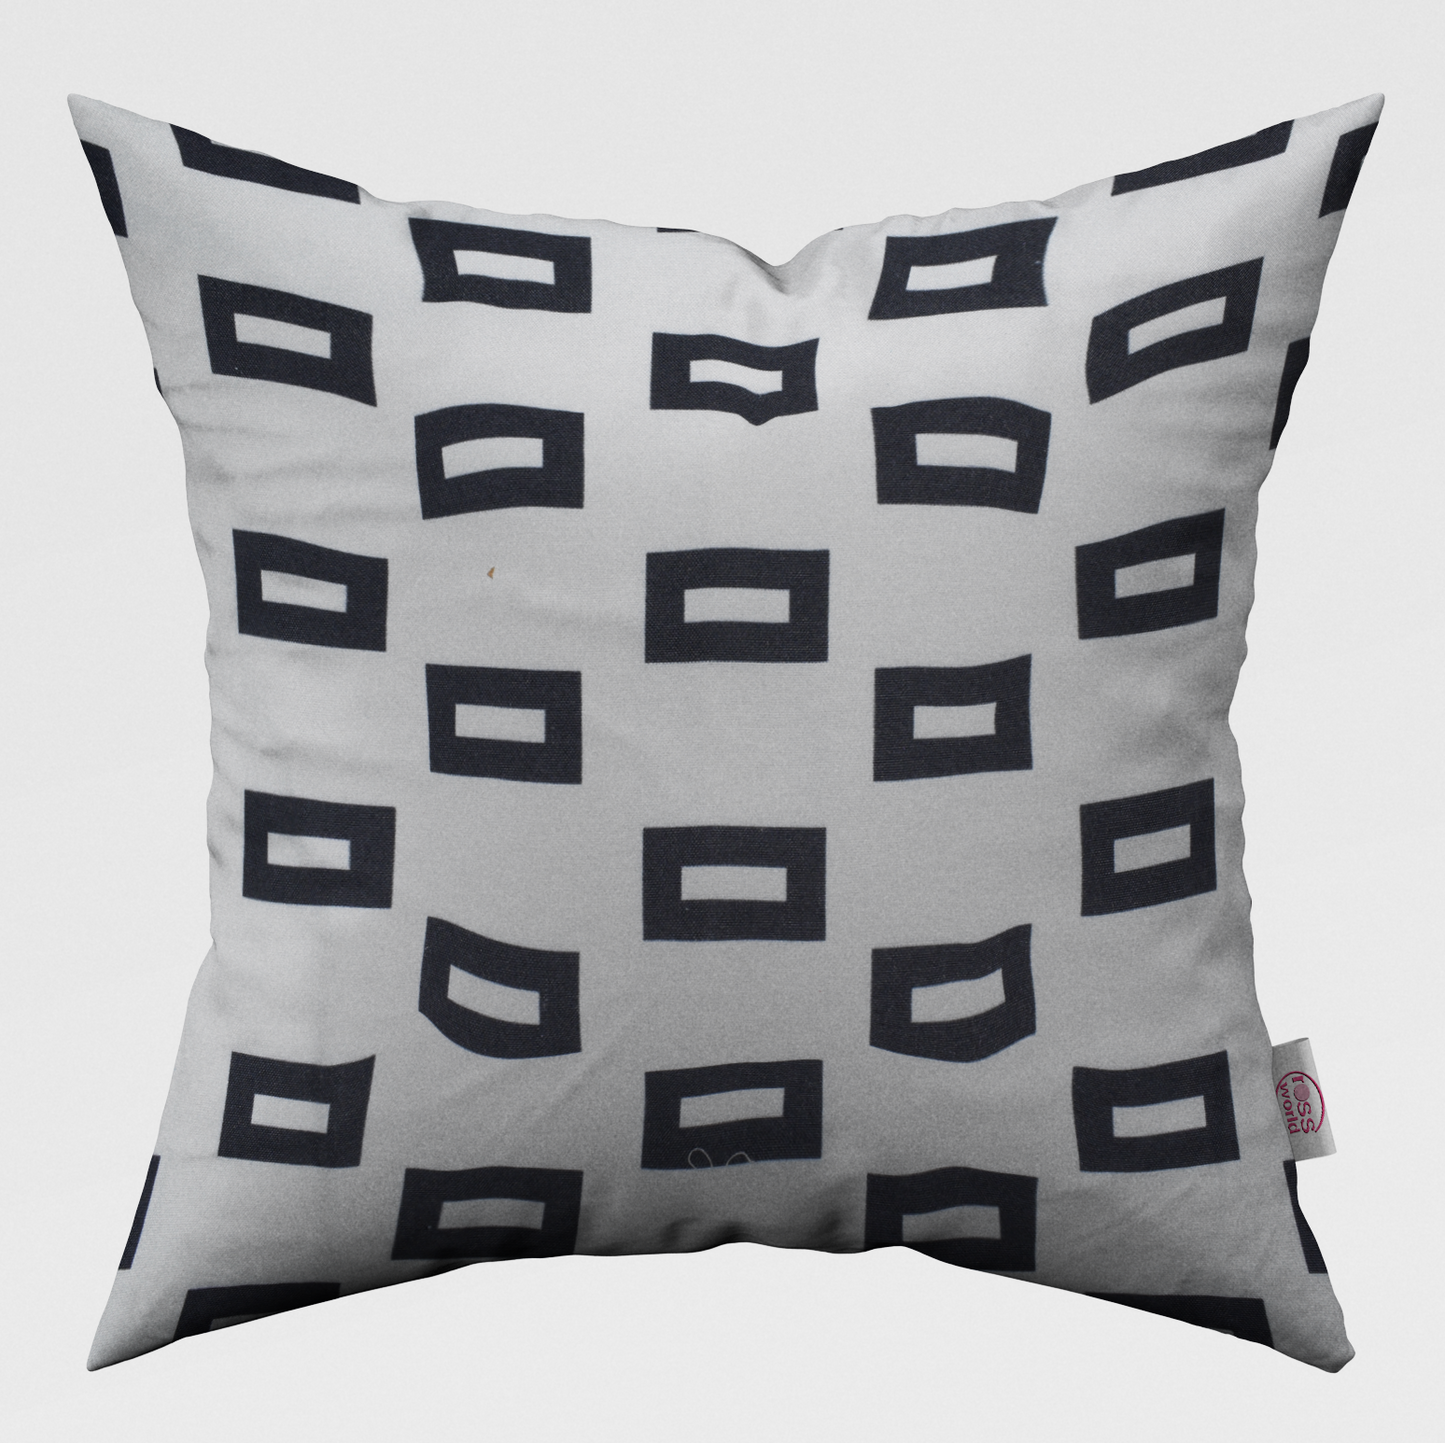 Black and White Design Cushion Cover